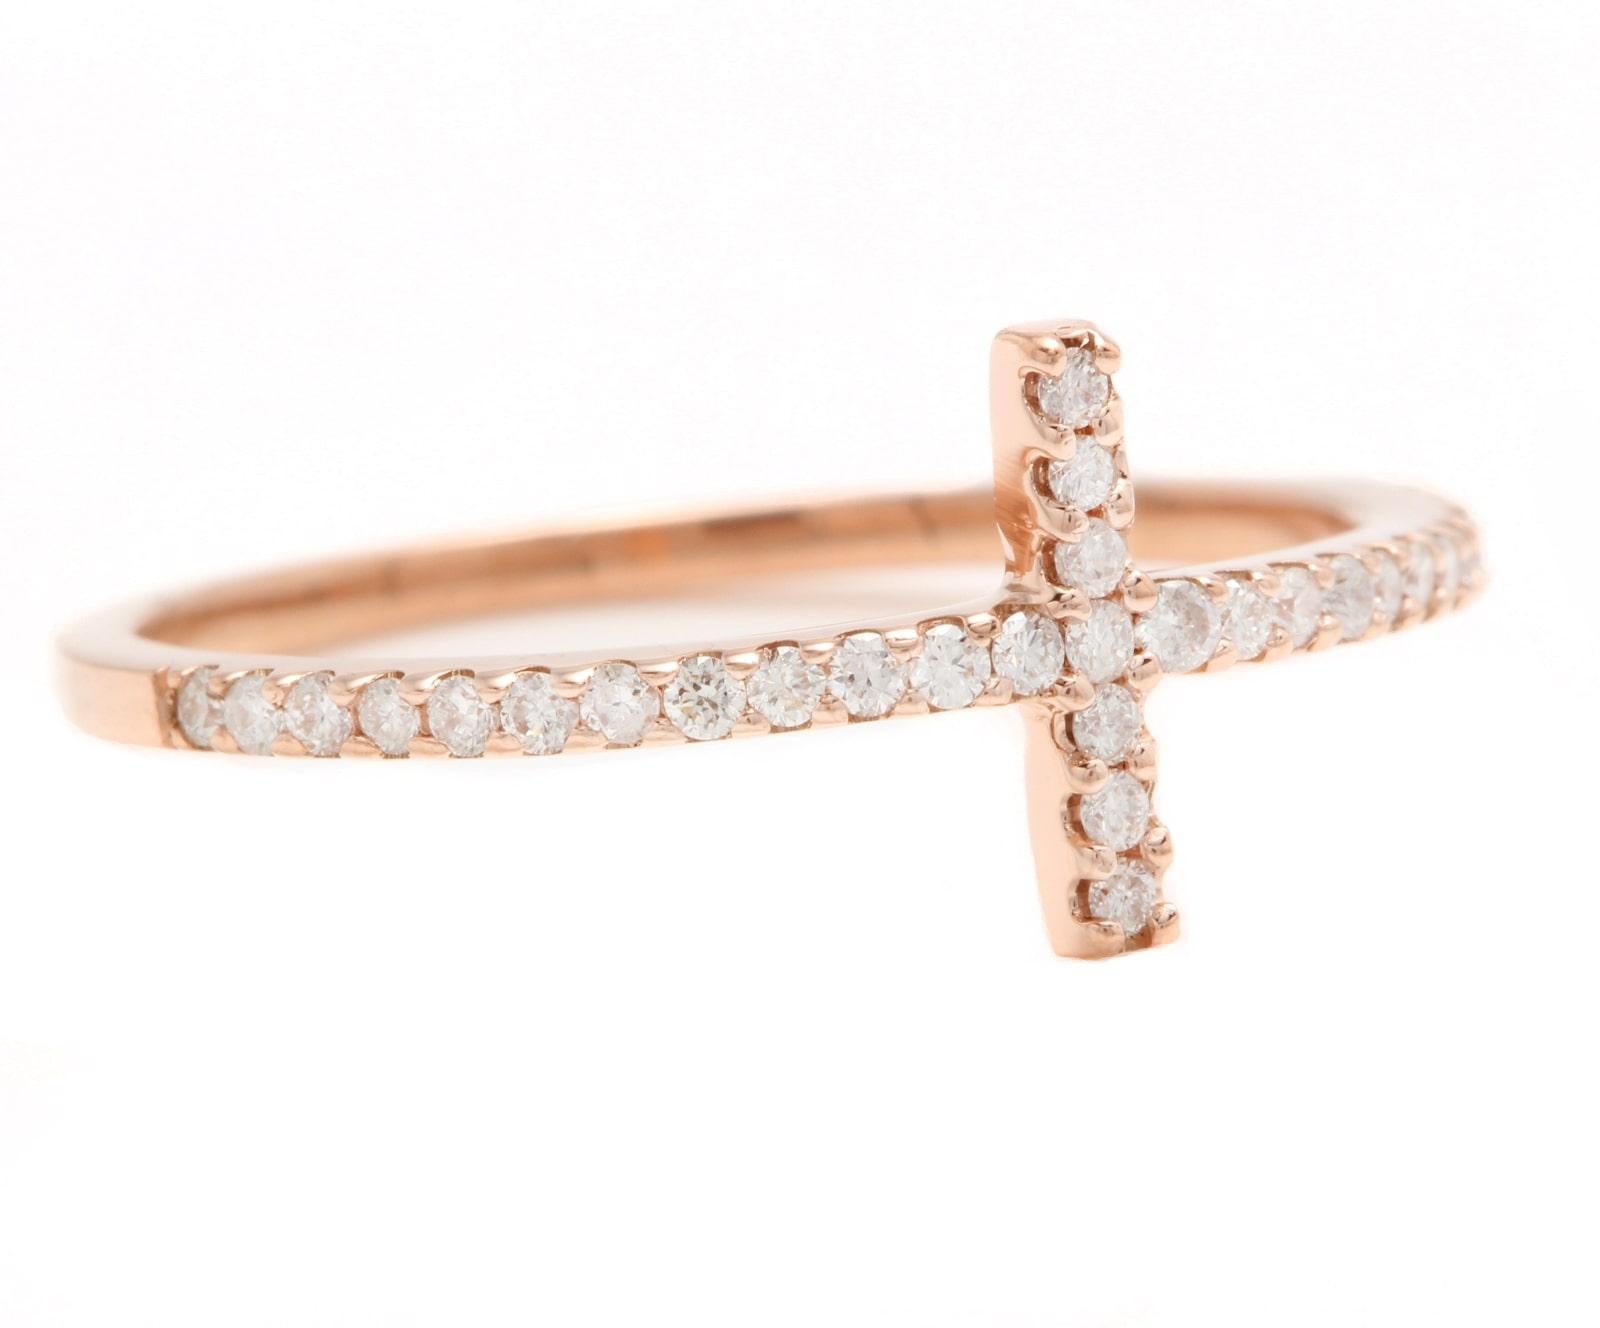 Fine 0.25 Carats Natural Diamond 14K Solid Rose Gold Cross Ring

Suggested Replacement Value: Approx. $1,400.00

Stamped: 14K

Total Natural Round Cut Diamonds Weight: Approx. 0.25 Carats (color G-H / Clarity SI1-SI2)

The width of the cross band